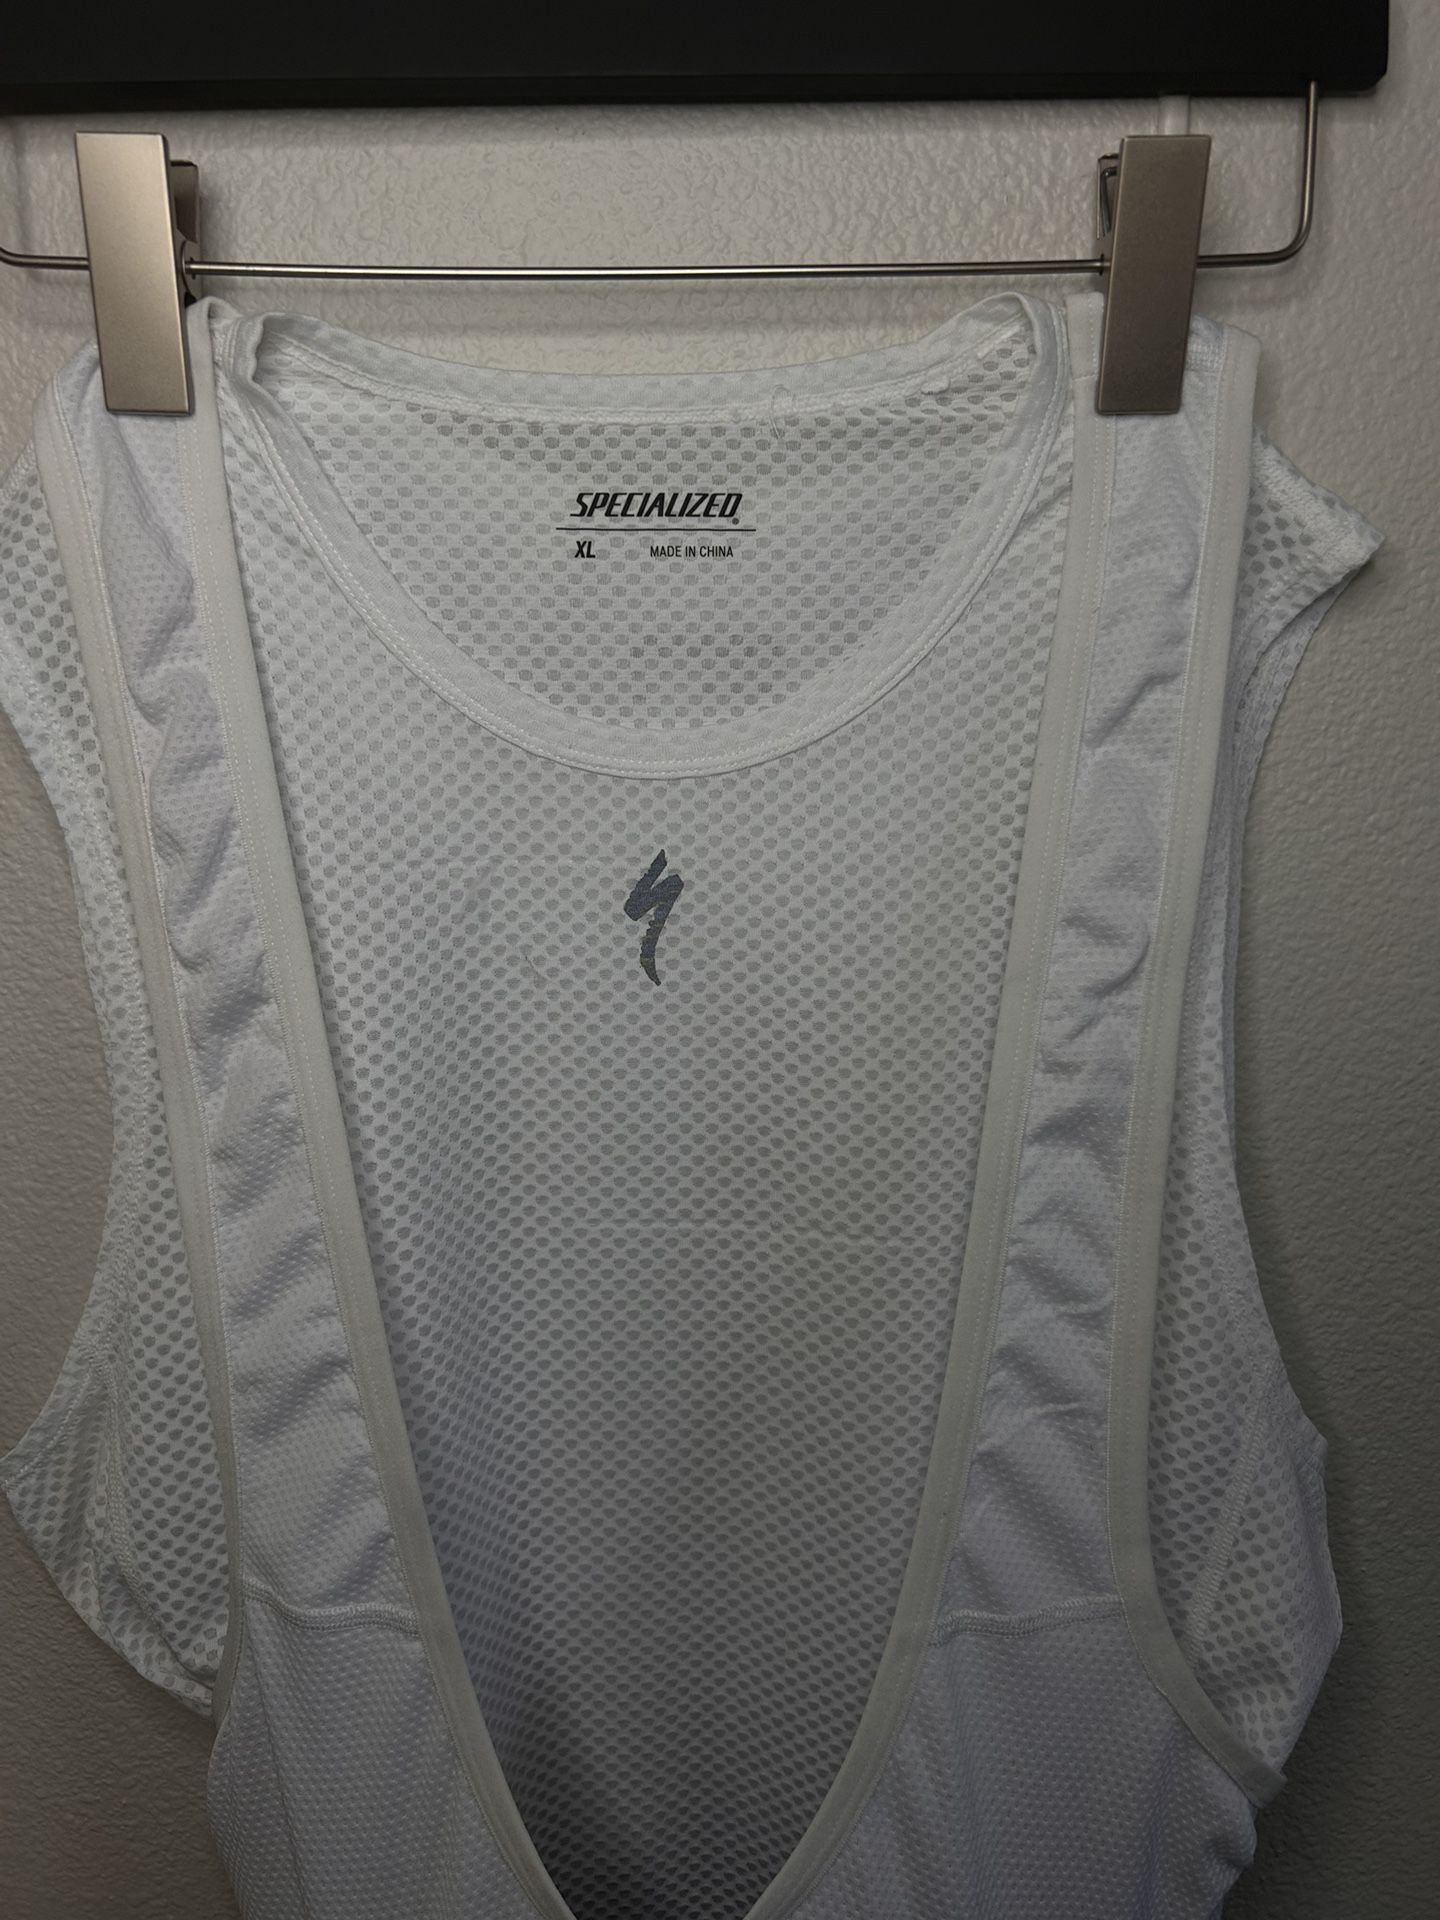  Specialized Cycling Bib & Sleeveless Base Layer Set - Size XL - $50 or Best Offer - Orlando